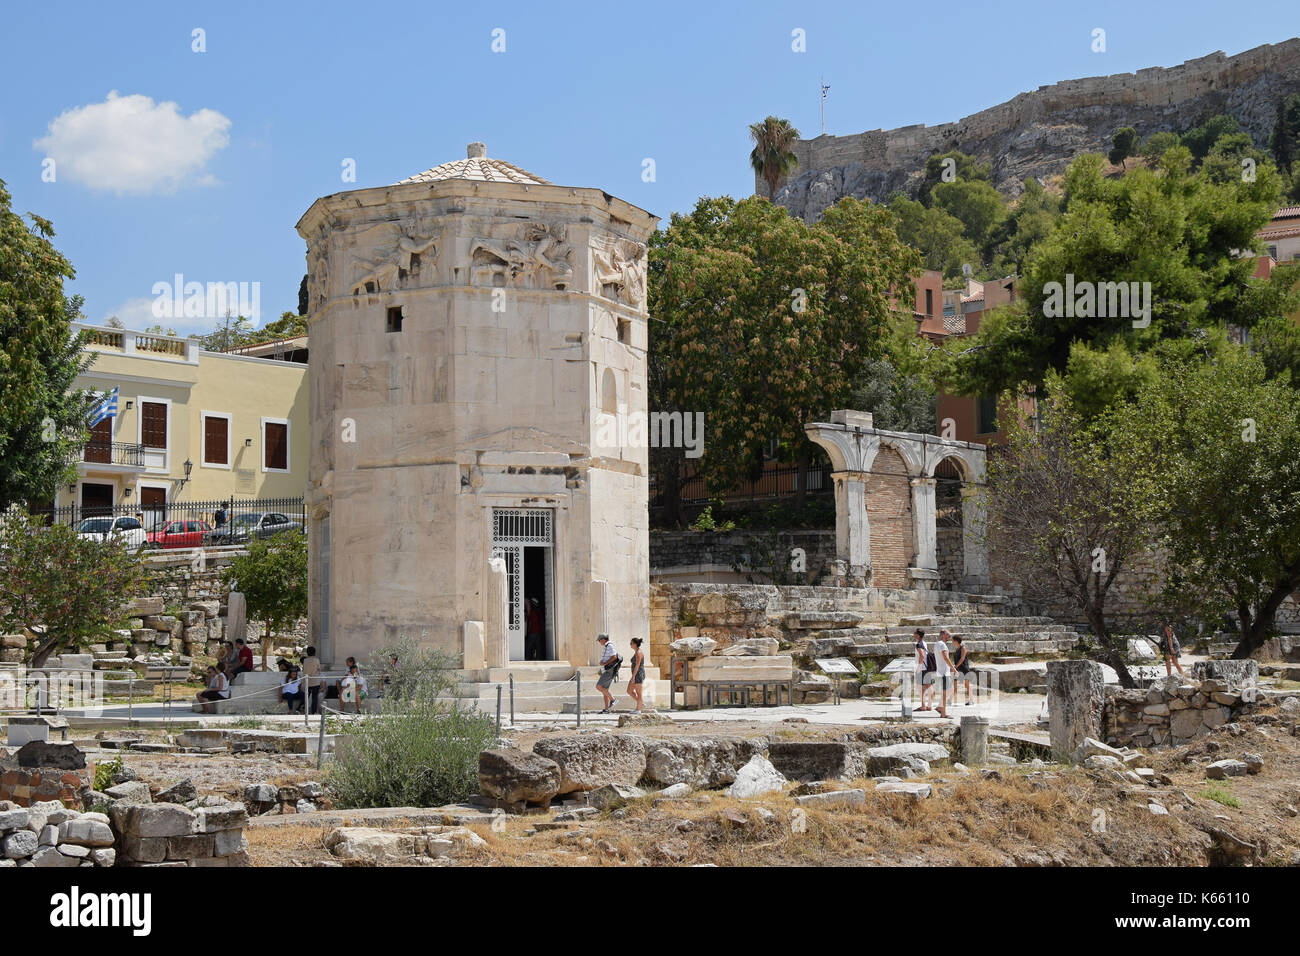 ATHENS, GREECE - AUGUST 4, 2016: People visiting tower of the winds. Ancient agora of Athens, Greece. Stock Photo